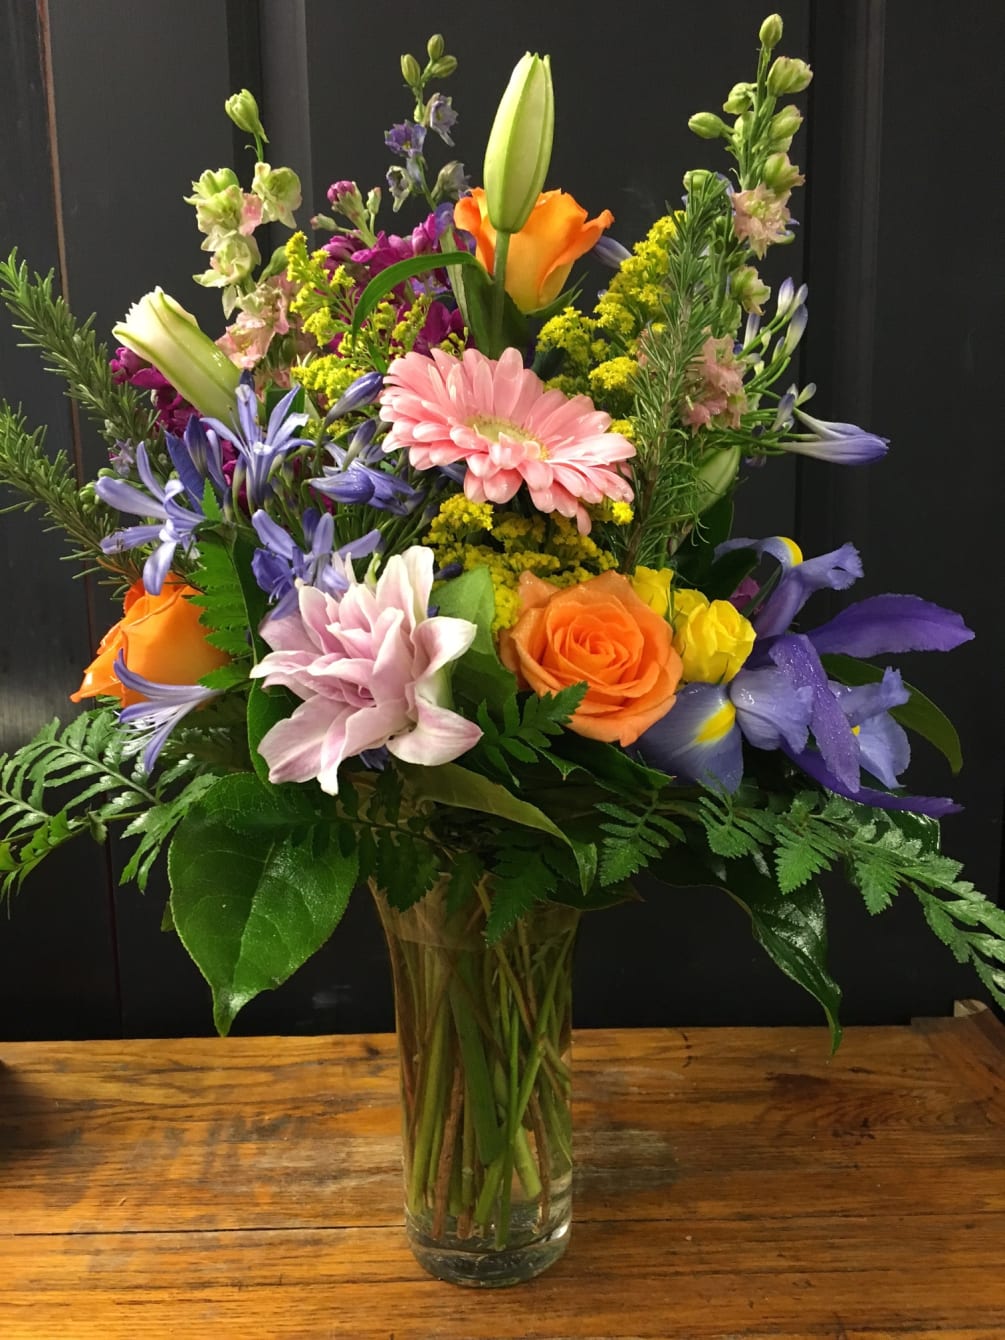 This brightly colored mix of flowers is sure to get their attention!